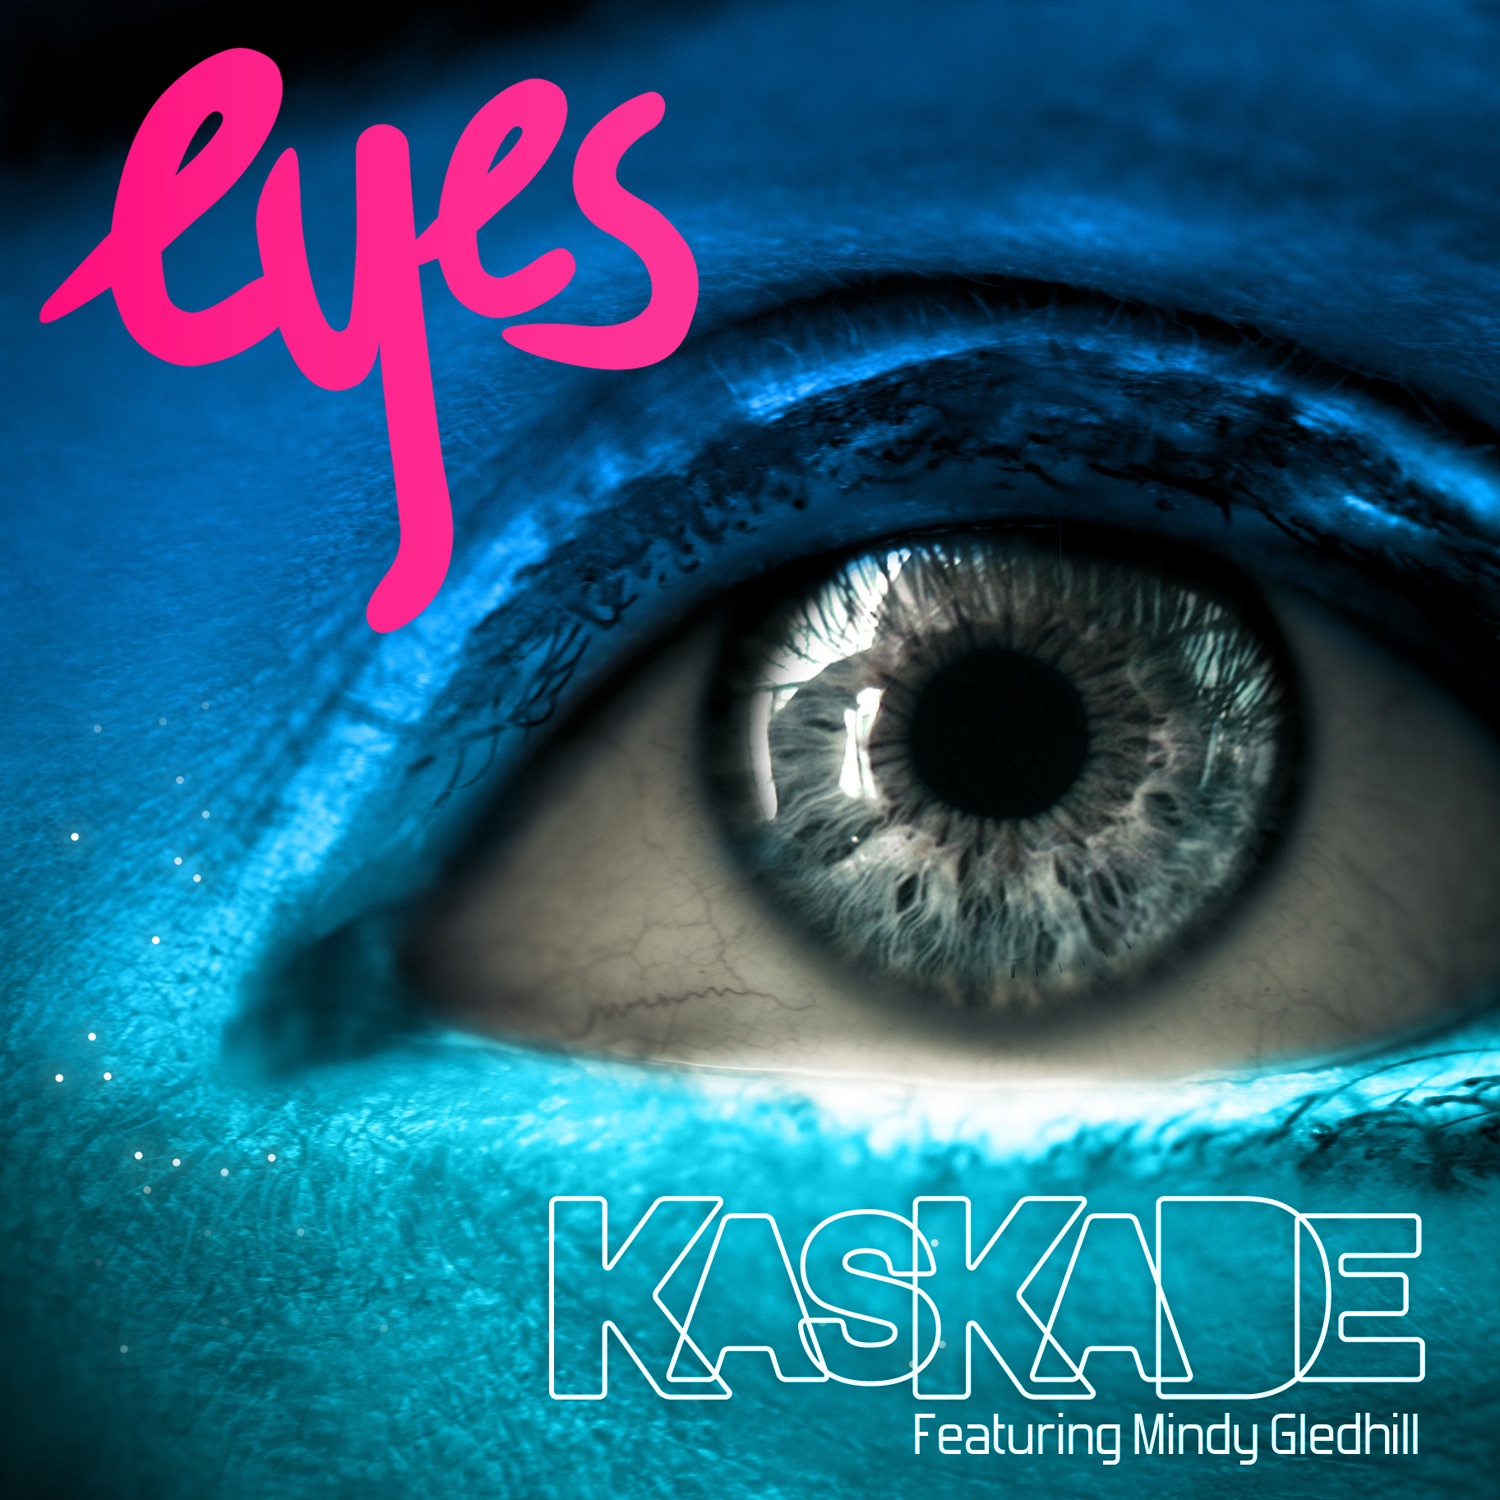 Kaskade featuring Mindy Gledhill — Eyes cover artwork